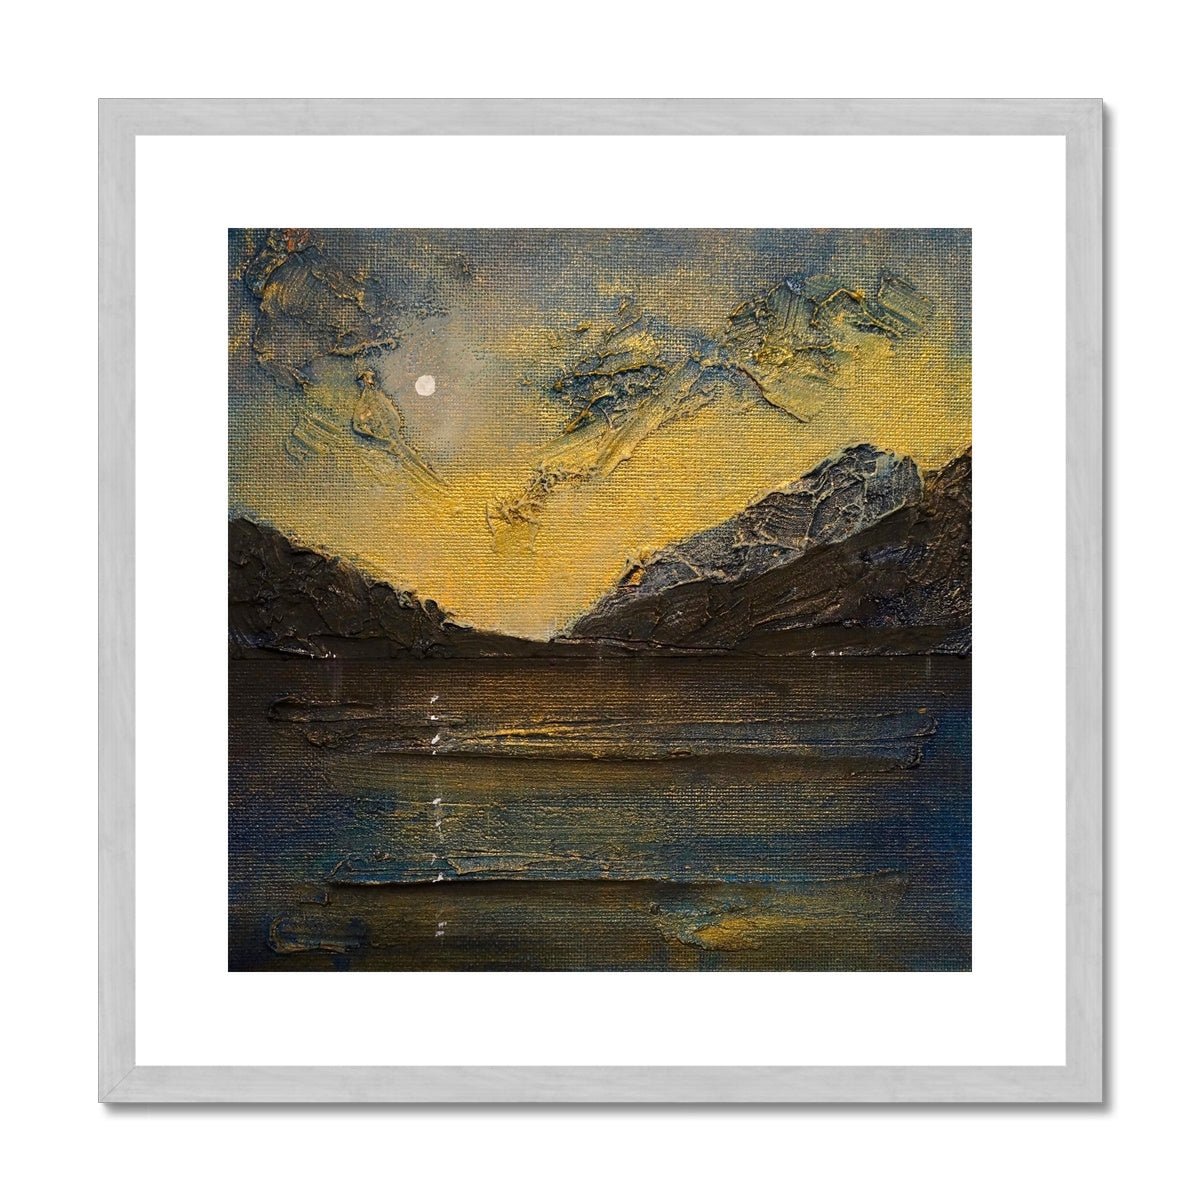 Loch Lomond Moonlight Painting | Antique Framed & Mounted Prints From Scotland-Antique Framed & Mounted Prints-Scottish Lochs & Mountains Art Gallery-20"x20"-Silver Frame-Paintings, Prints, Homeware, Art Gifts From Scotland By Scottish Artist Kevin Hunter